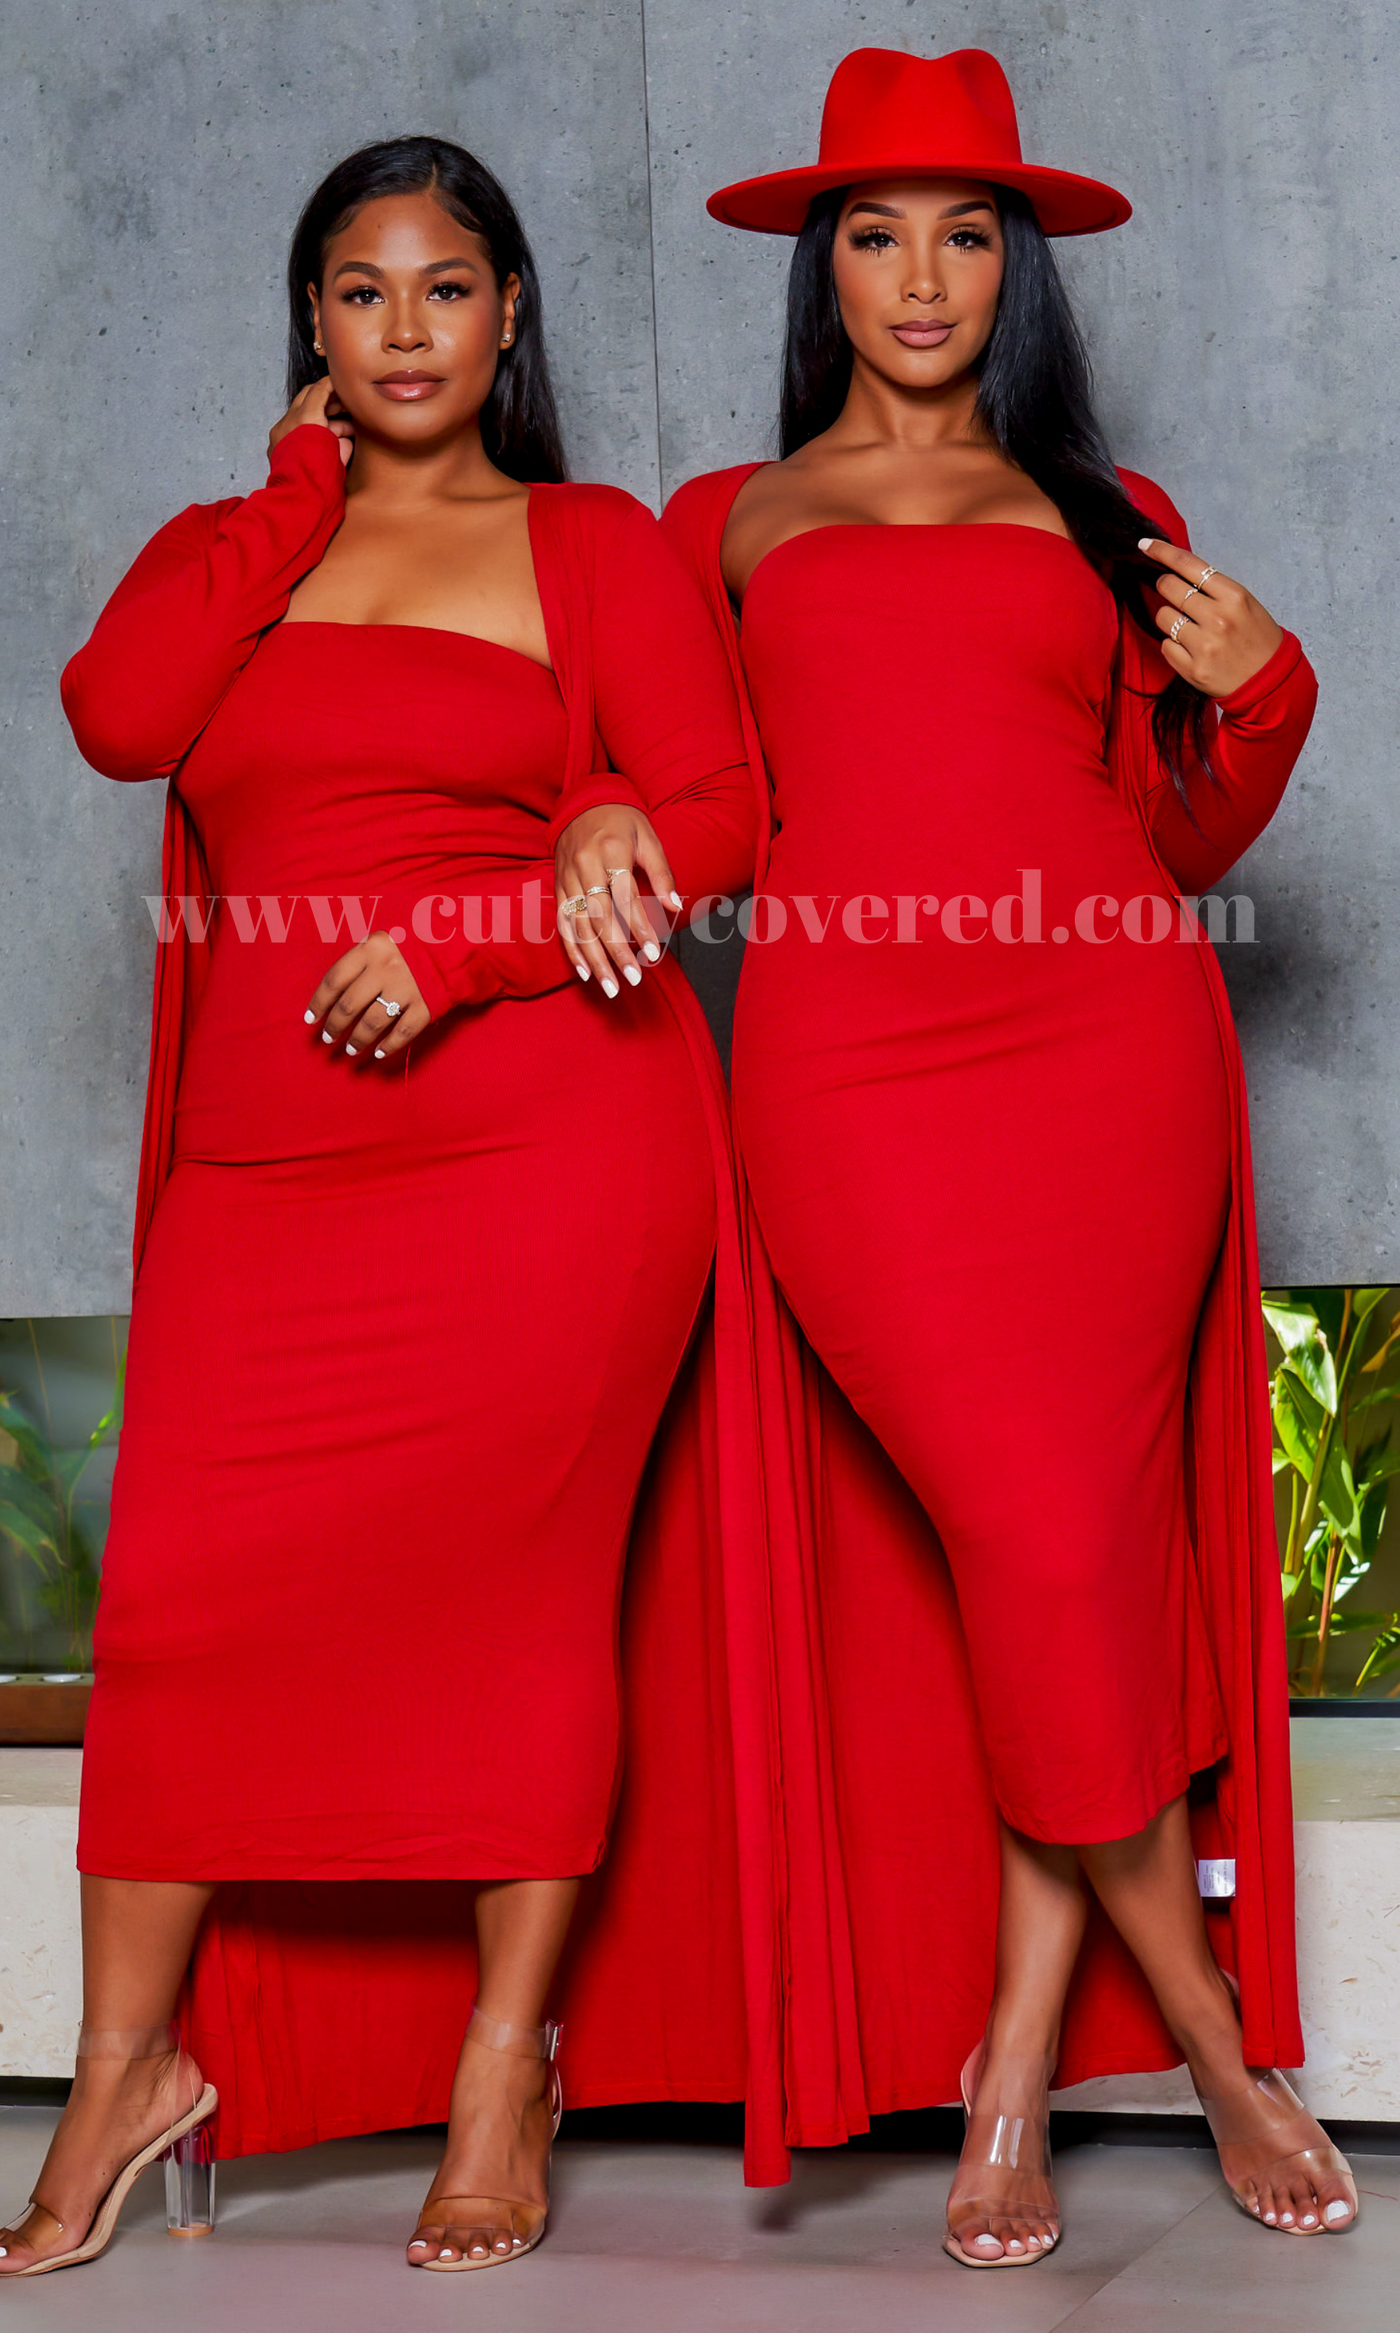 Slay Bae | Cardigan Dress Set - Red (3/4 sleeve) PREORDER Ships June 30th - Cutely Covered